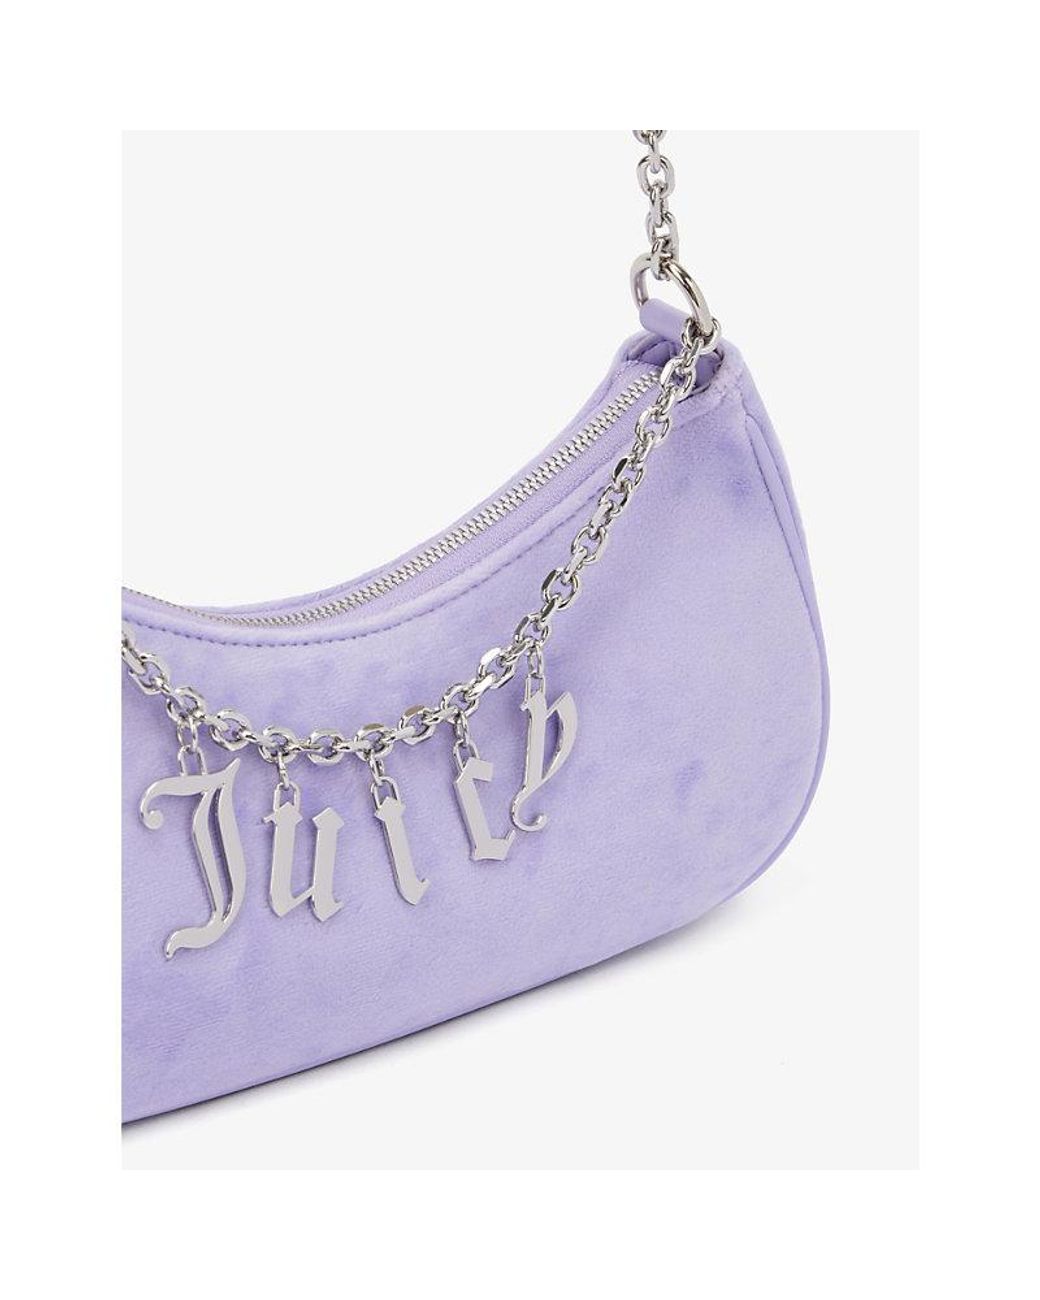 Juicy Couture Purple Grape Soft Leather Heavy Gold Chain Purse